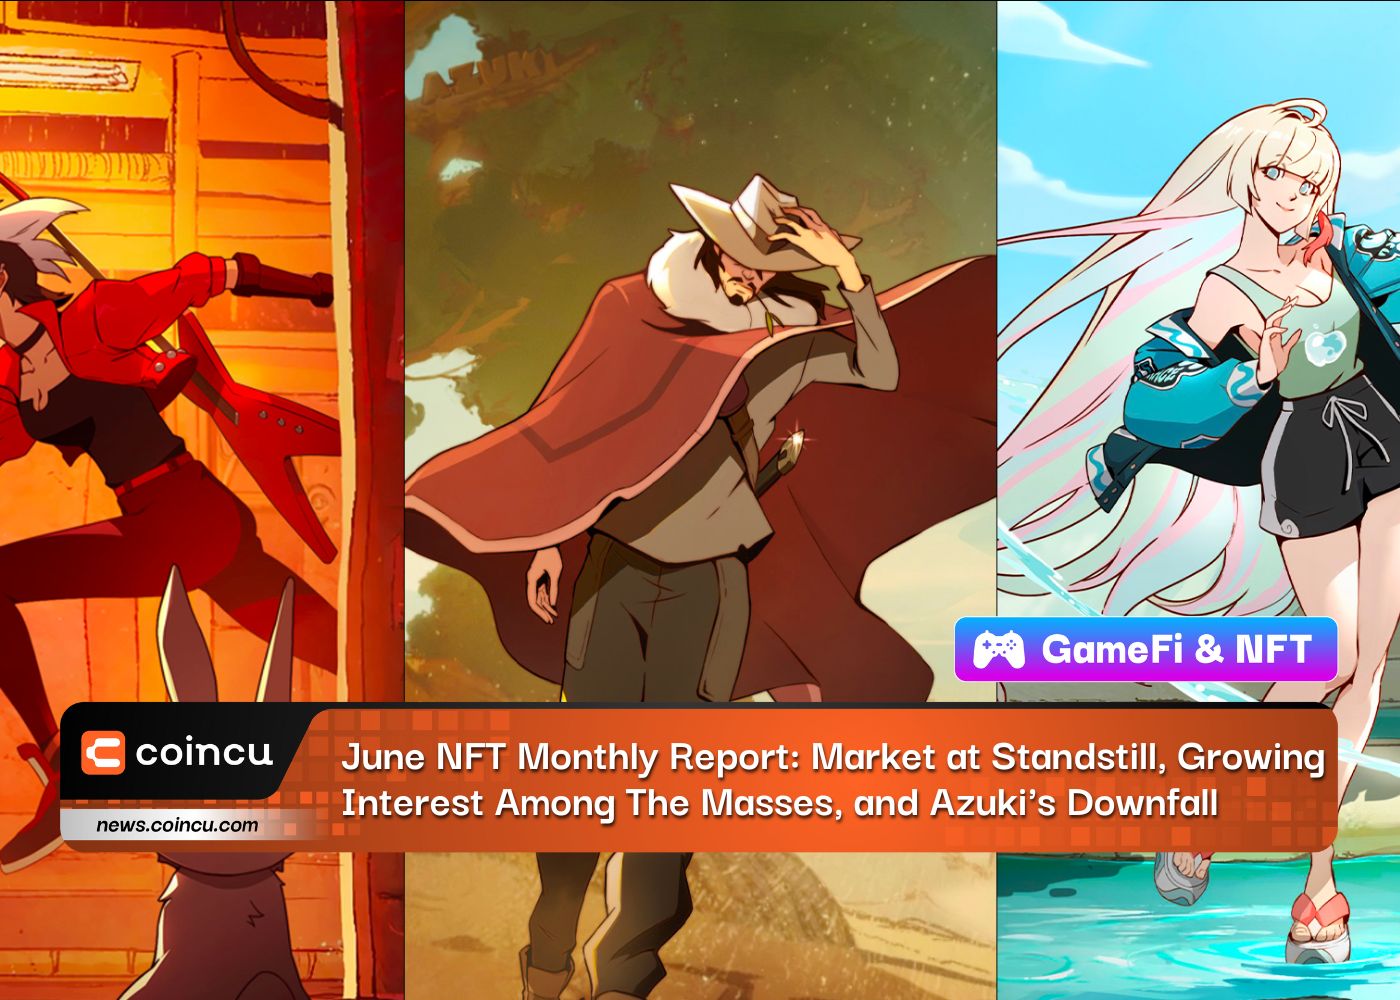 June NFT Monthly Report: Market at Standstill, Growing Interest Among The Masses, and Azuki's Downfall